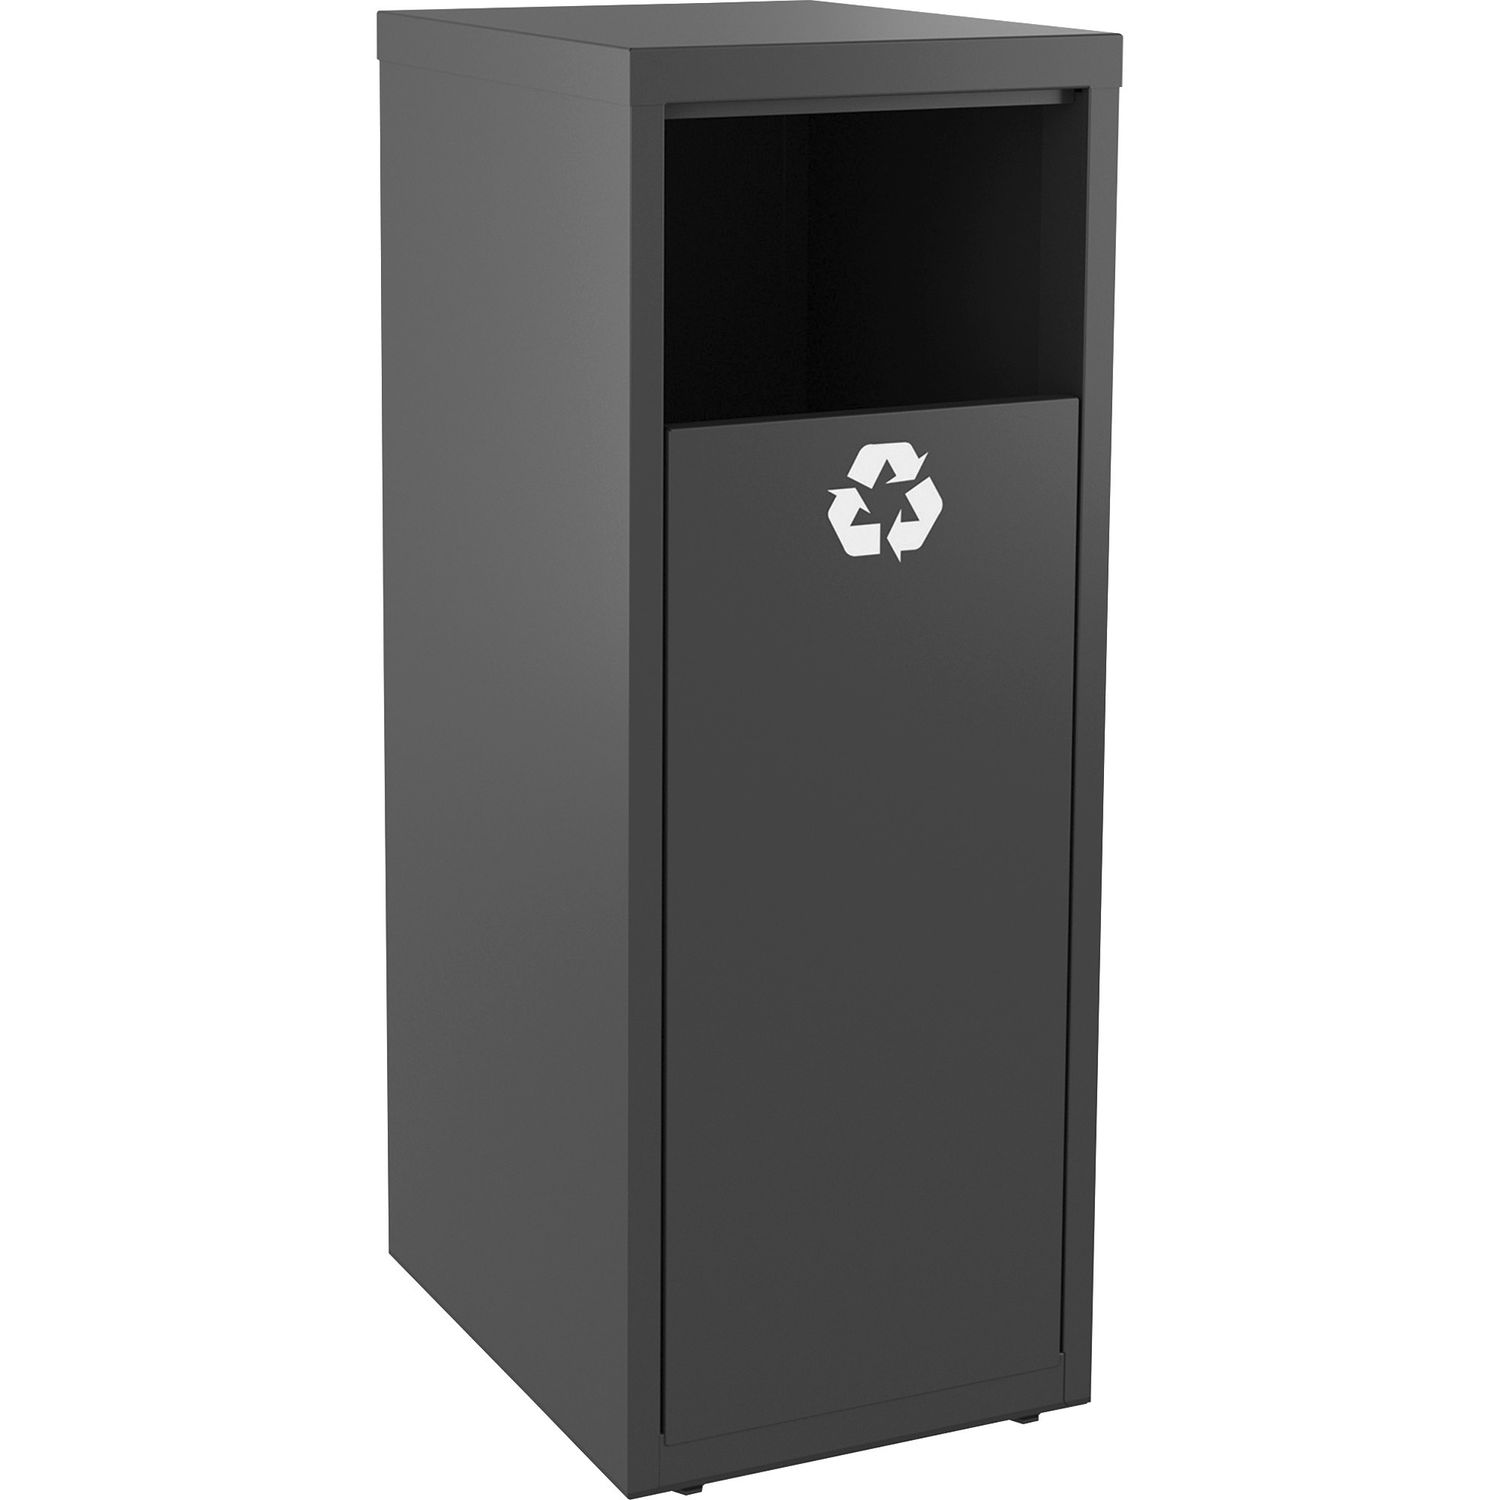 Recycling Tower 10 gal Capacity, 40.2" Height x 18.6" Width, Charcoal Gray, 1 Each